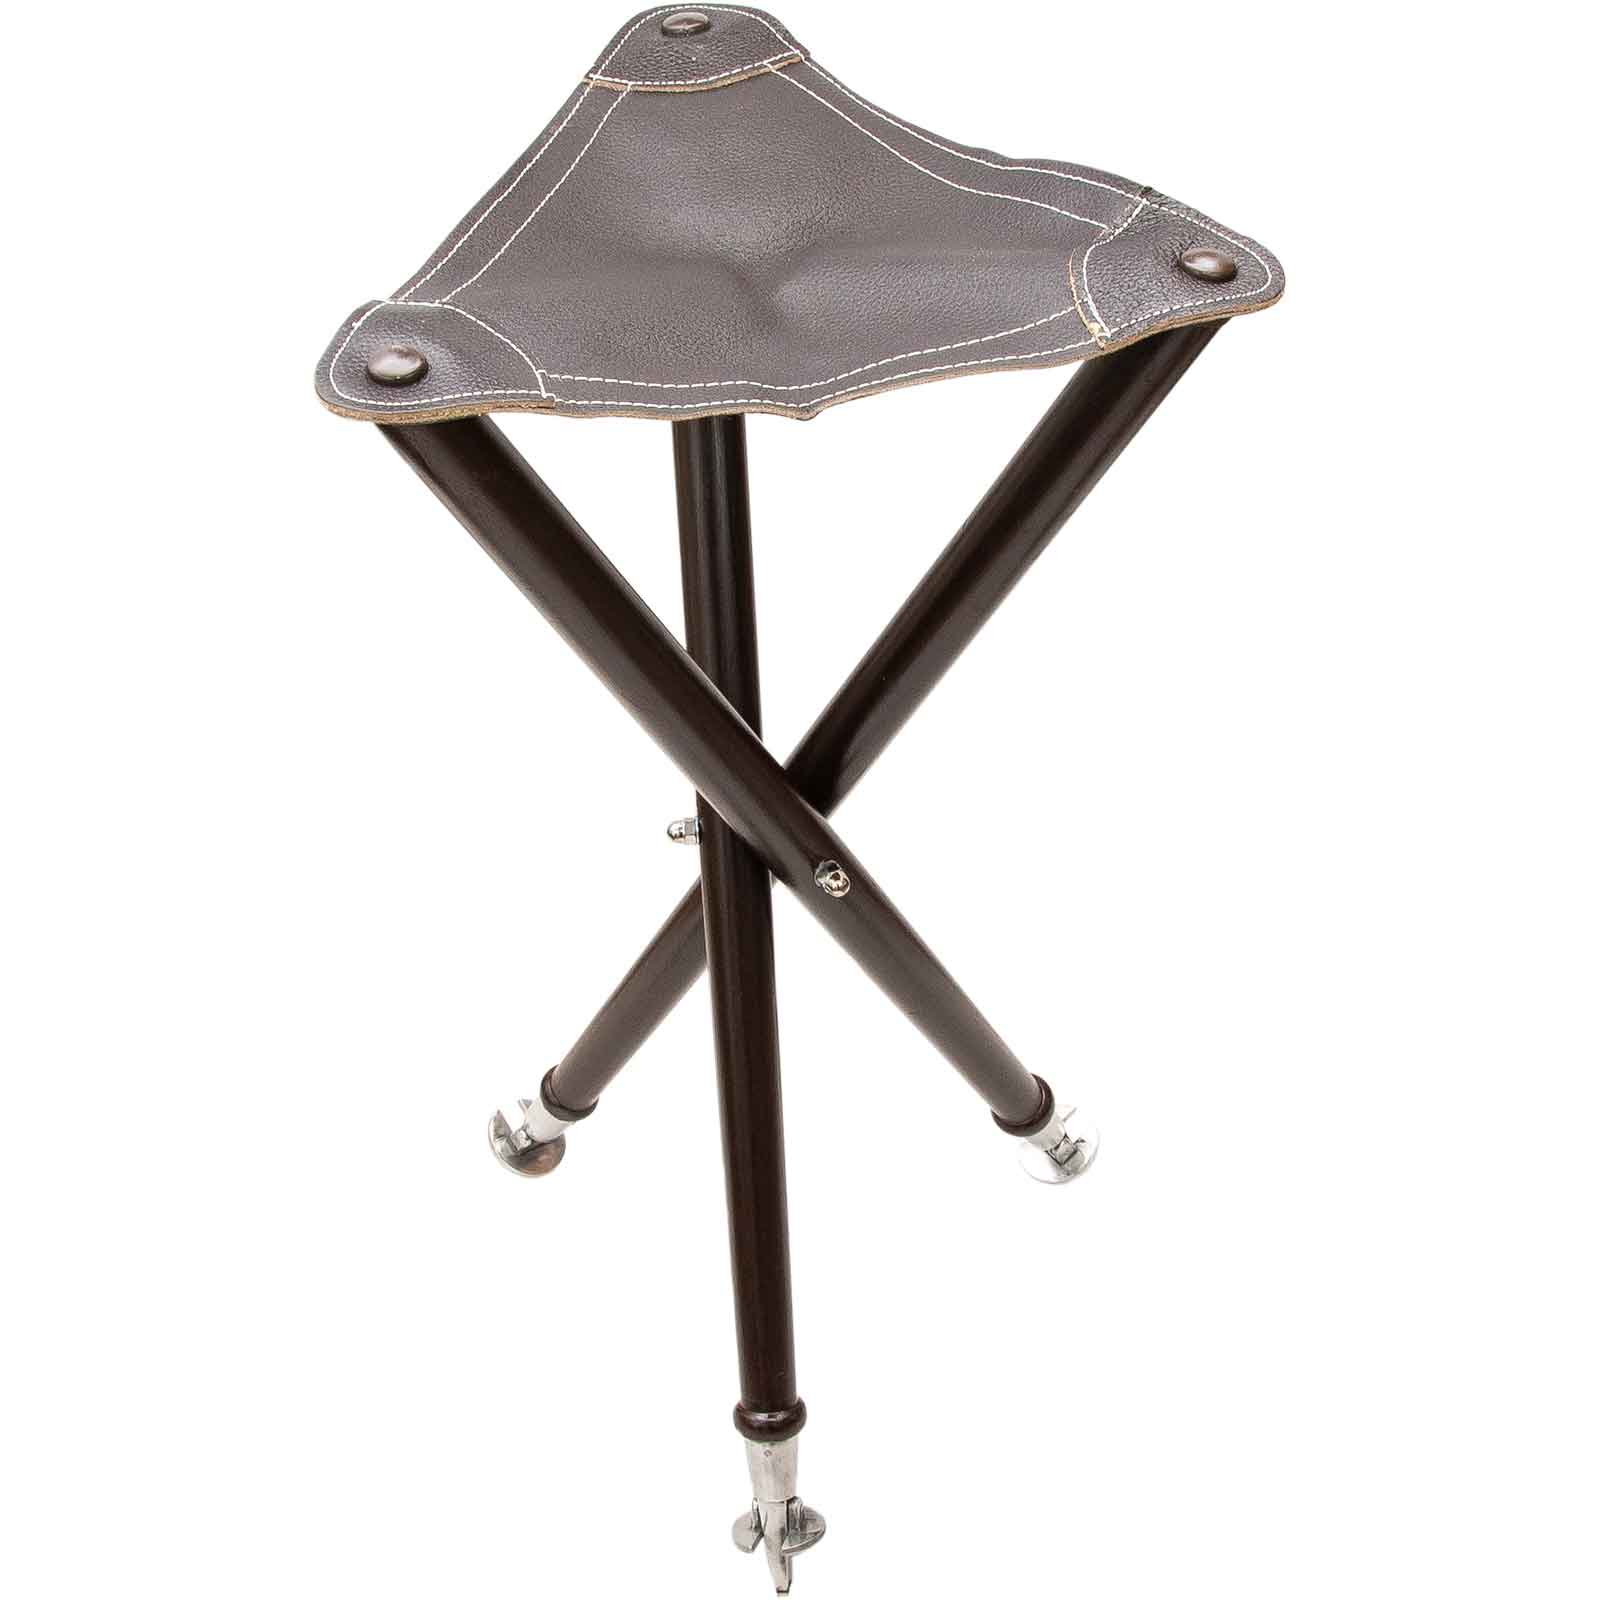 Eurohunt Hinge Chair With A Metal Foot